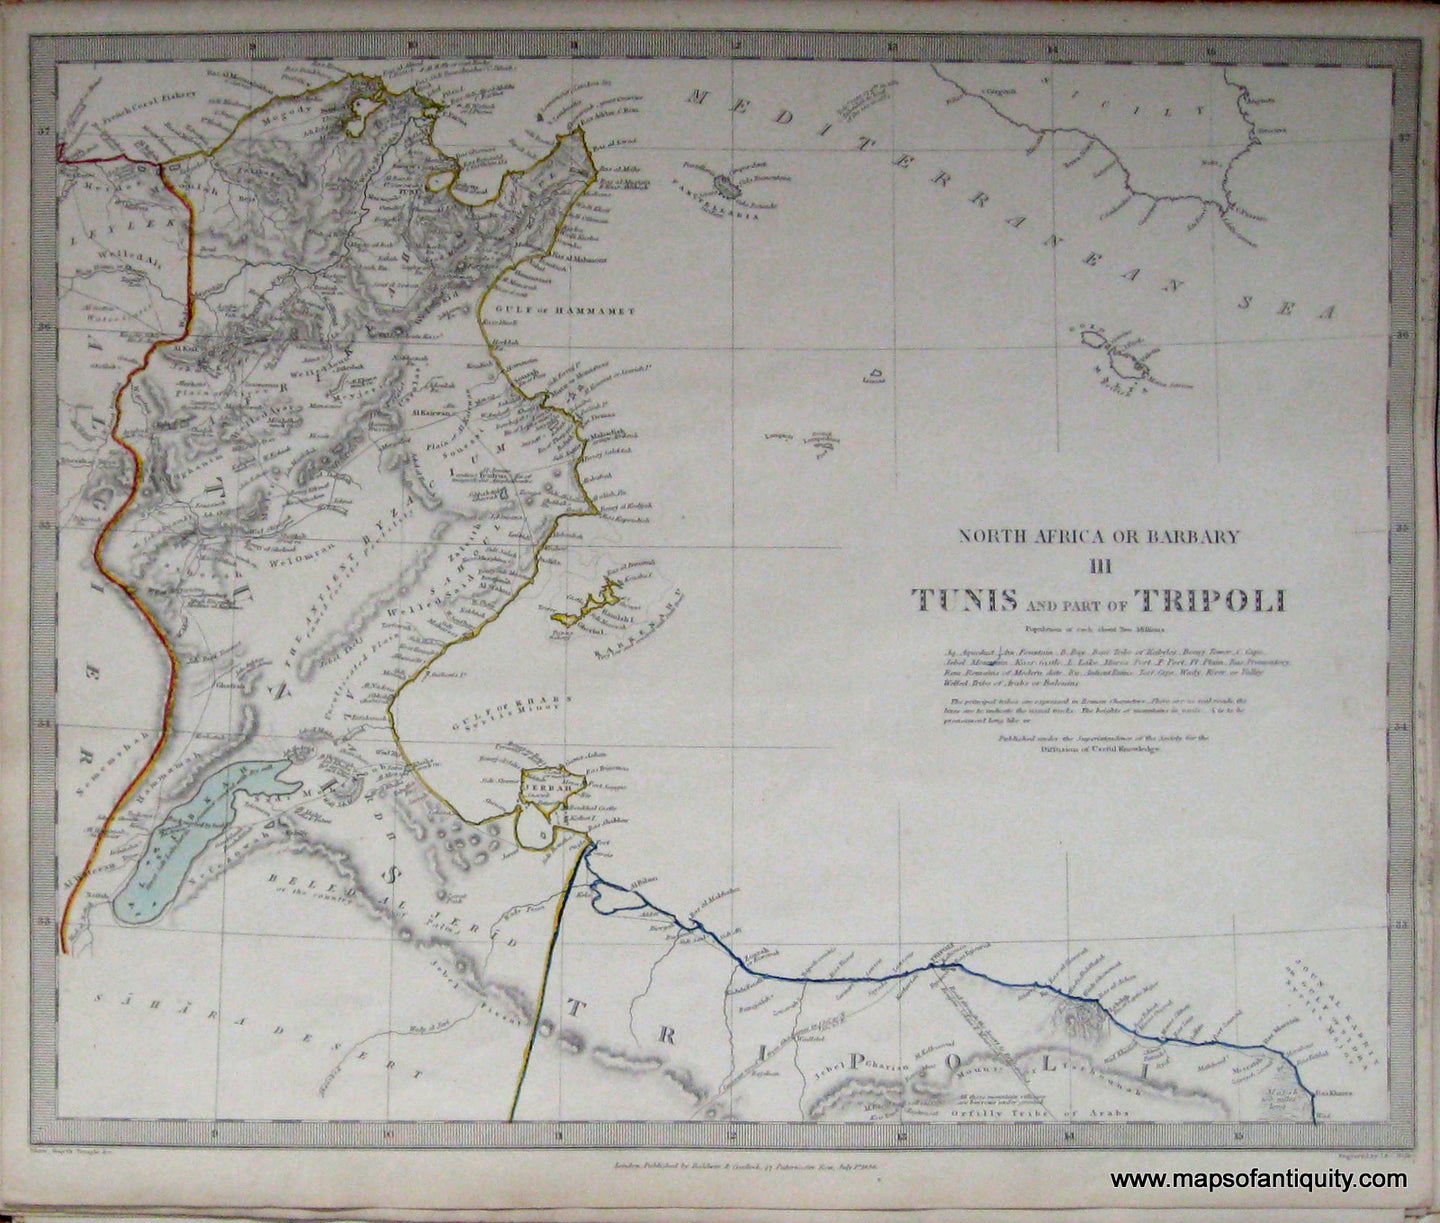 Antique-Hand-Colored-Map-North-Africa-or-Barbary-III-Tunis-and-part-of-Tripoli-Africa-Tunisia-1840/1844-SDUK/Society-for-the-Diffusion-of-Useful-Knowledge-Maps-Of-Antiquity